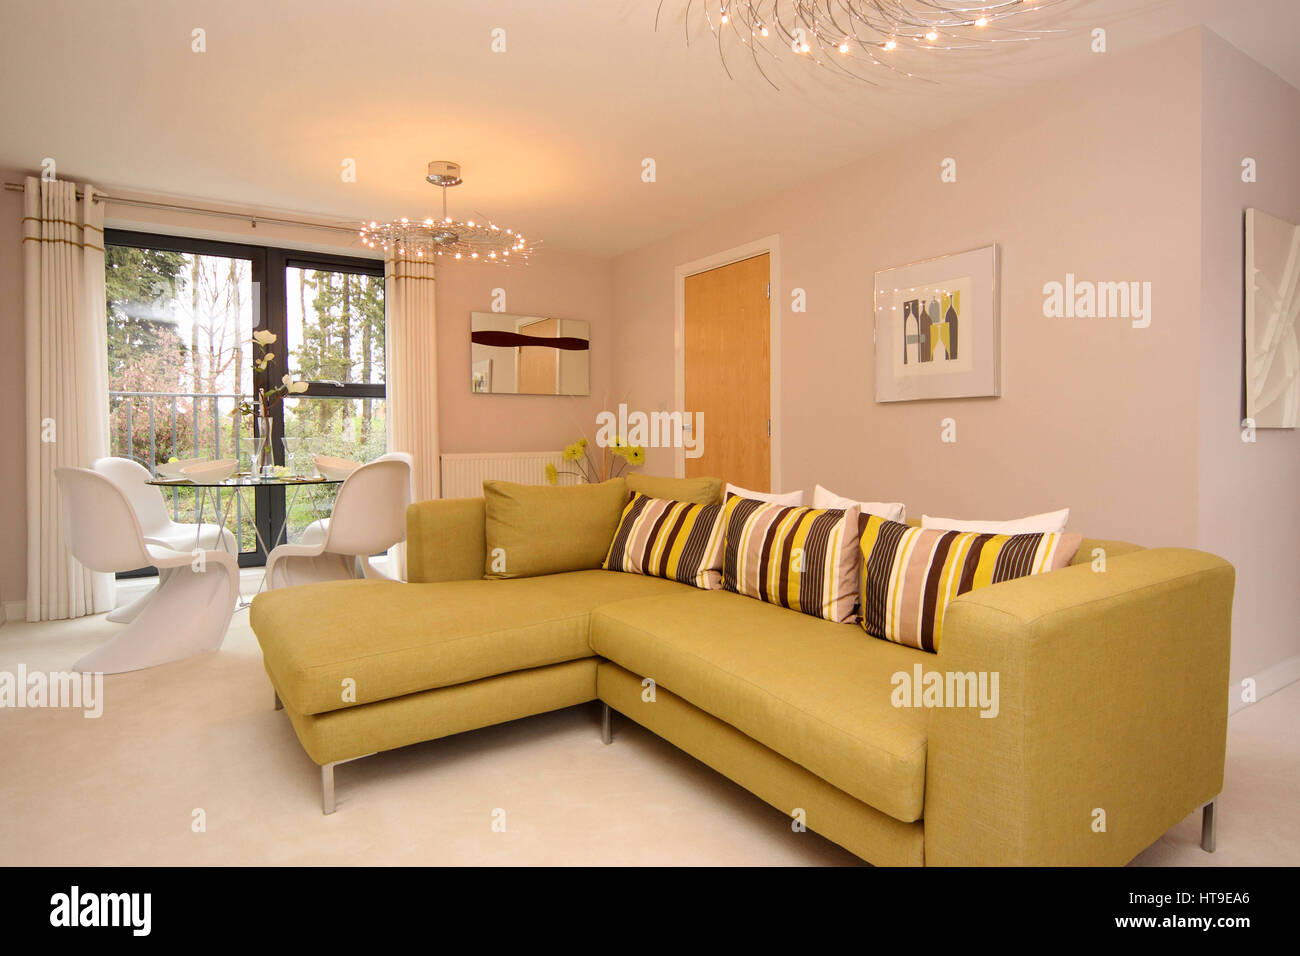 Home interior, lounge decor, modern, new build, yellow sofa, lounge diner, dining area, Stock Photo